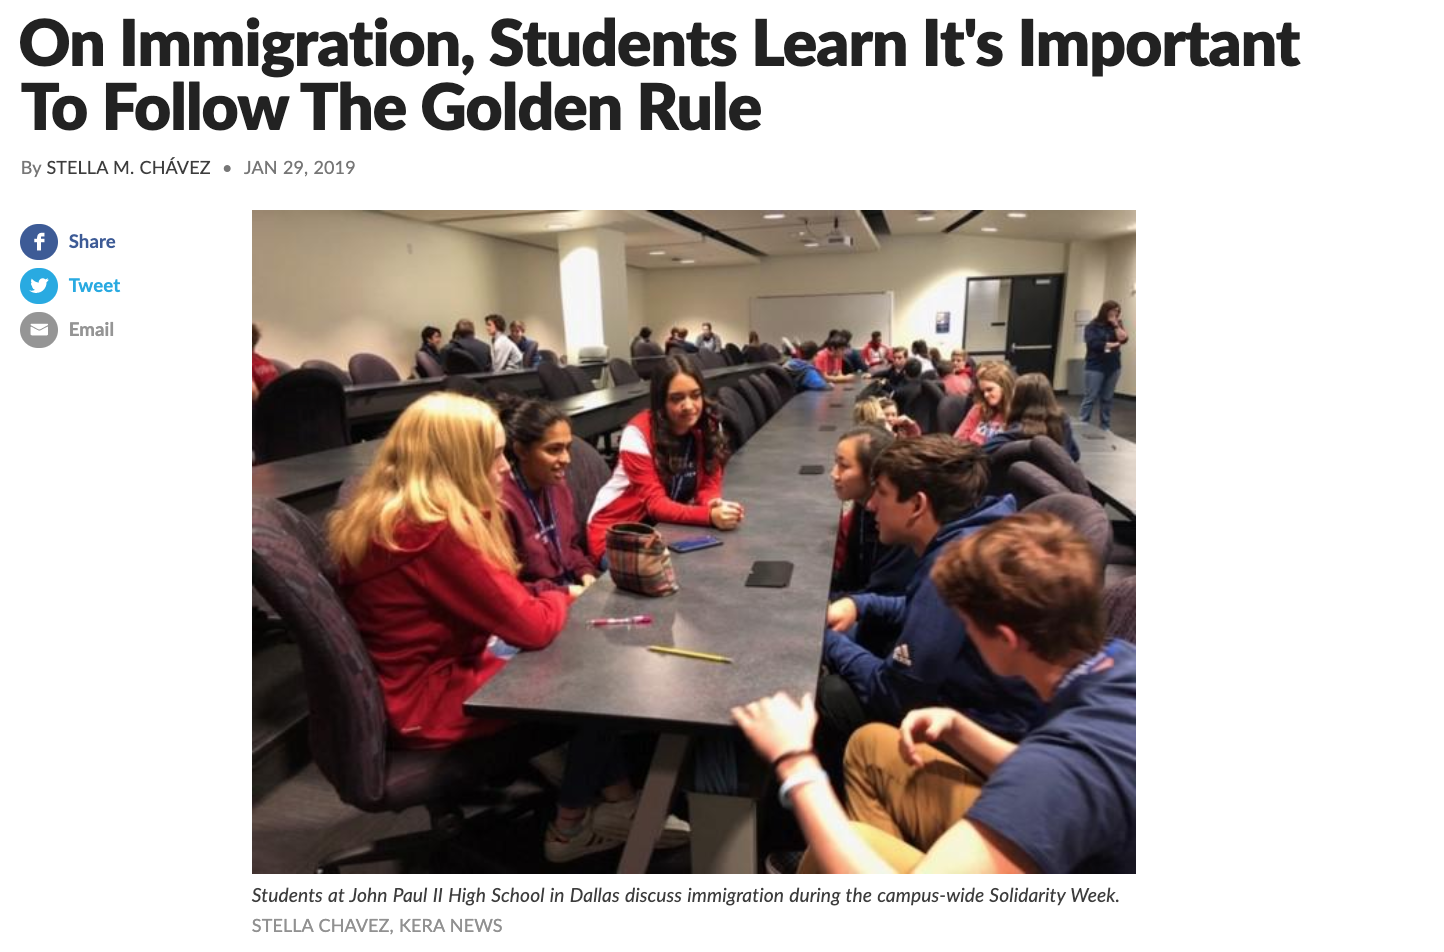 On Immigration, Students Learn It's Important To Follow The Golden Rule